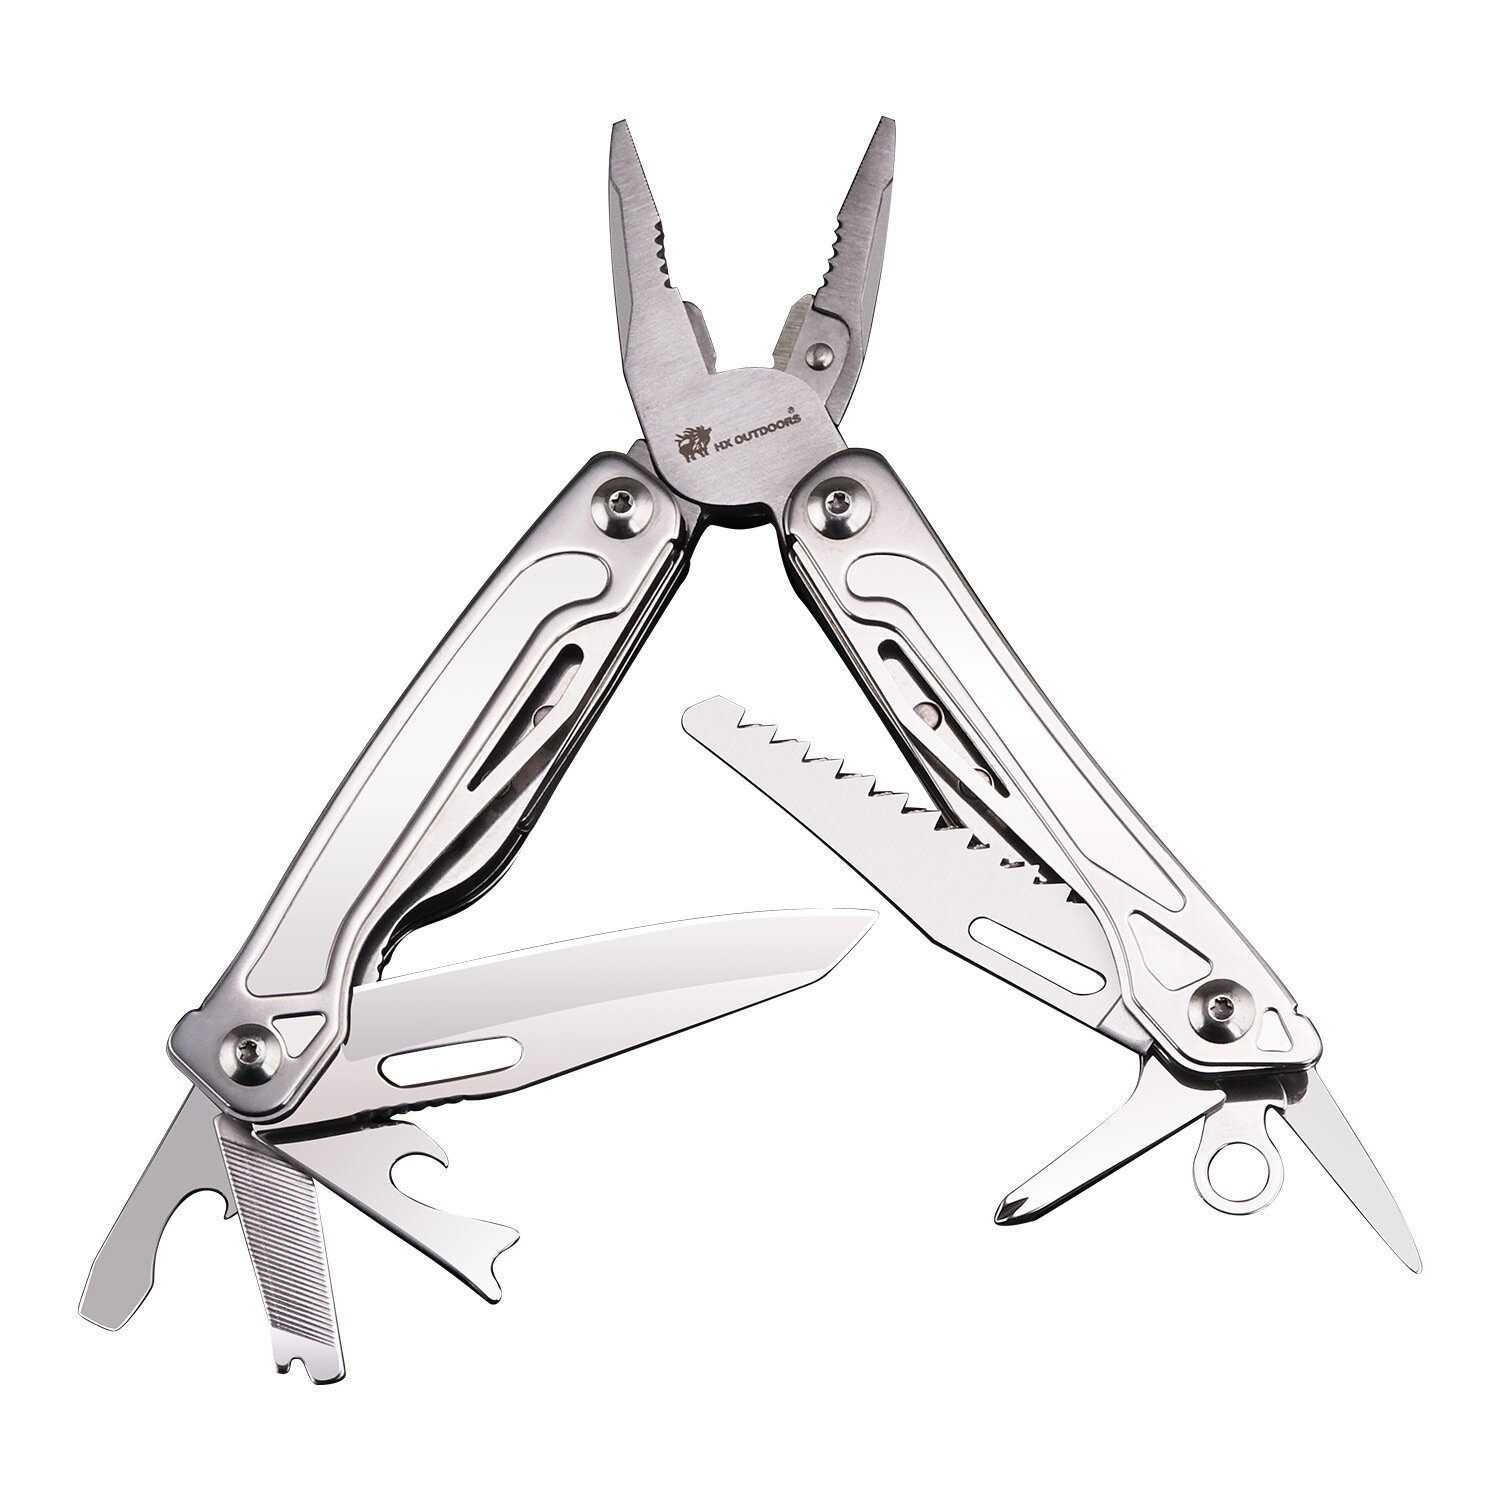 HX OUTDOORS 14 in 1 Car Multi Lightweight Folding Pliers/ Knife /Scissors Household Outdoor Survival Camping Bicycle Fishing Hand Tool With screwdriver and Box